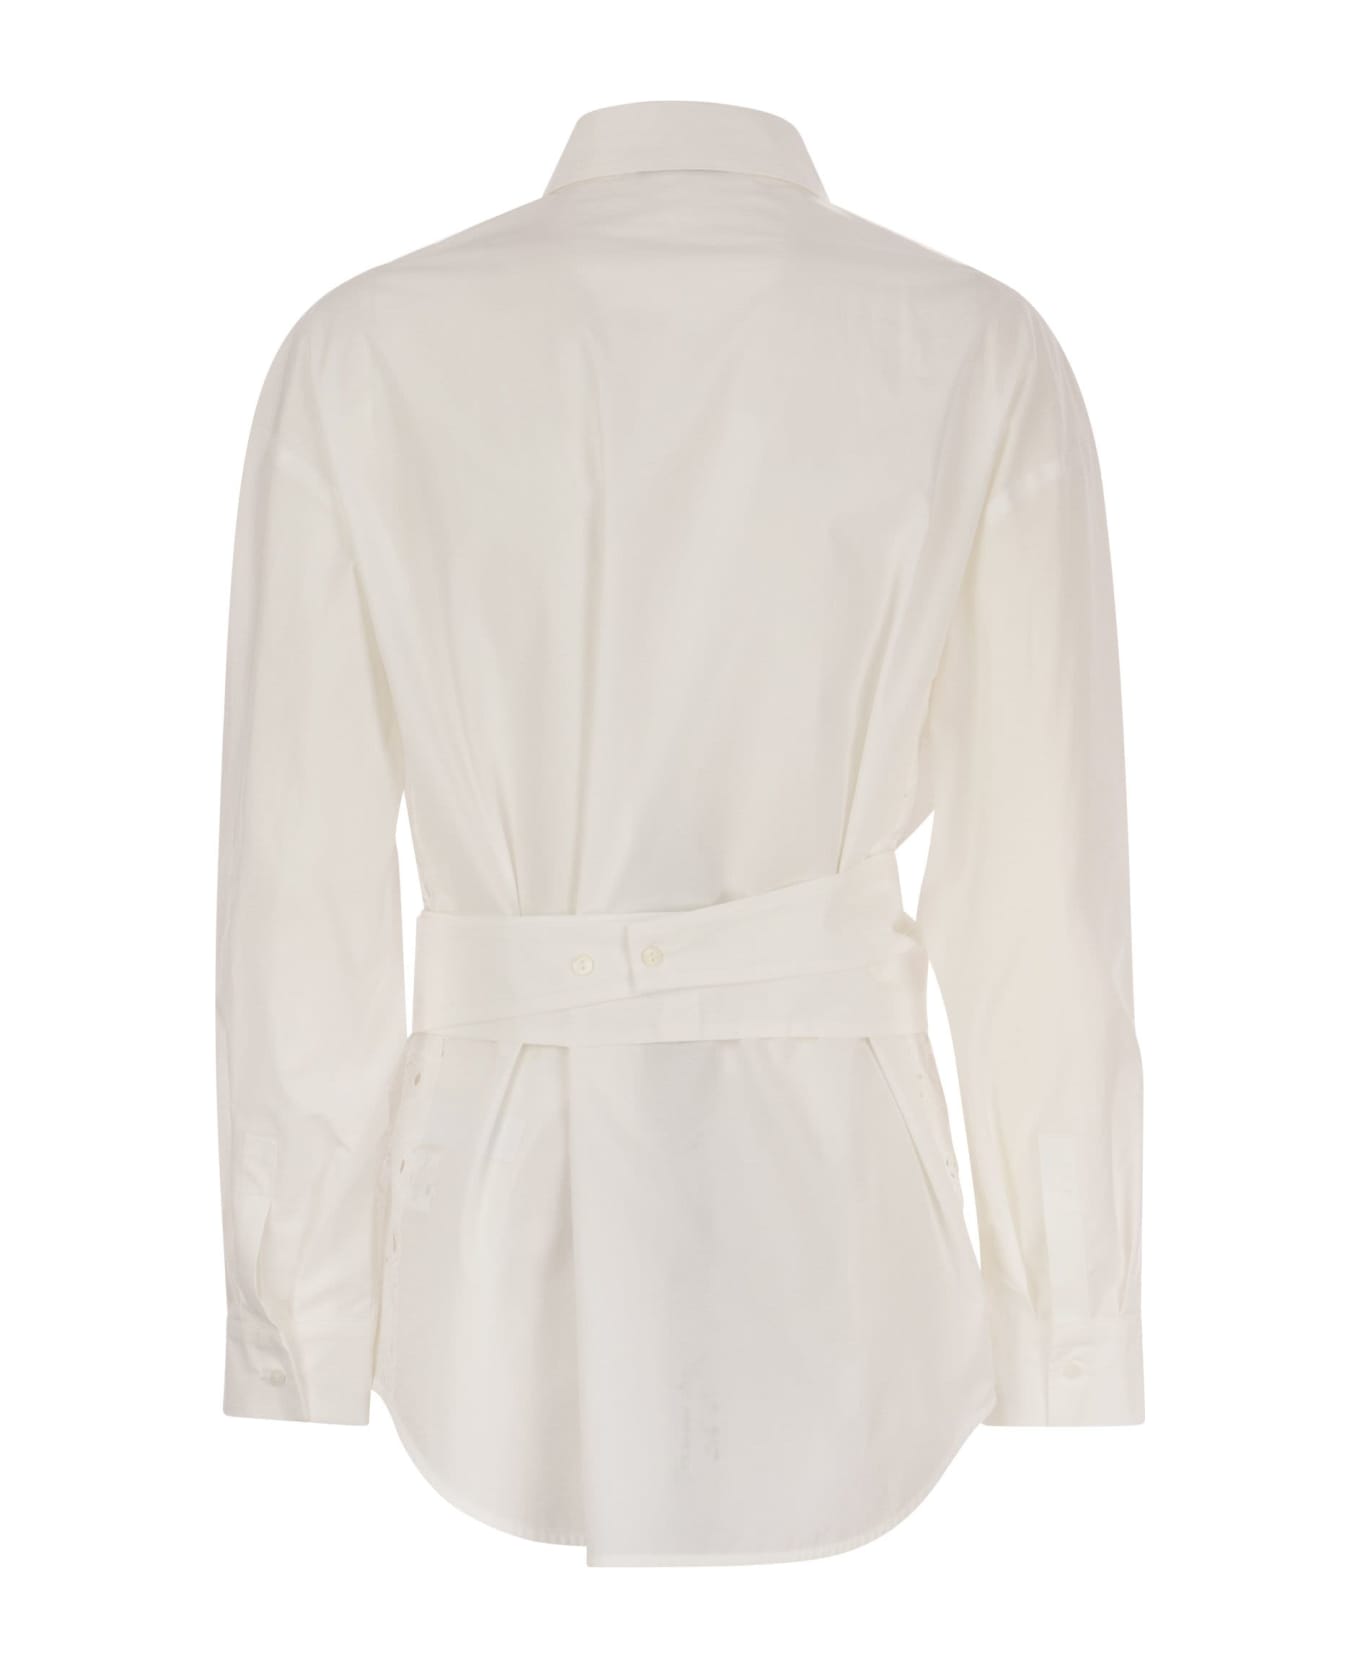 Fabiana Filippi Shirt With Embroidery And Belt - White シャツ